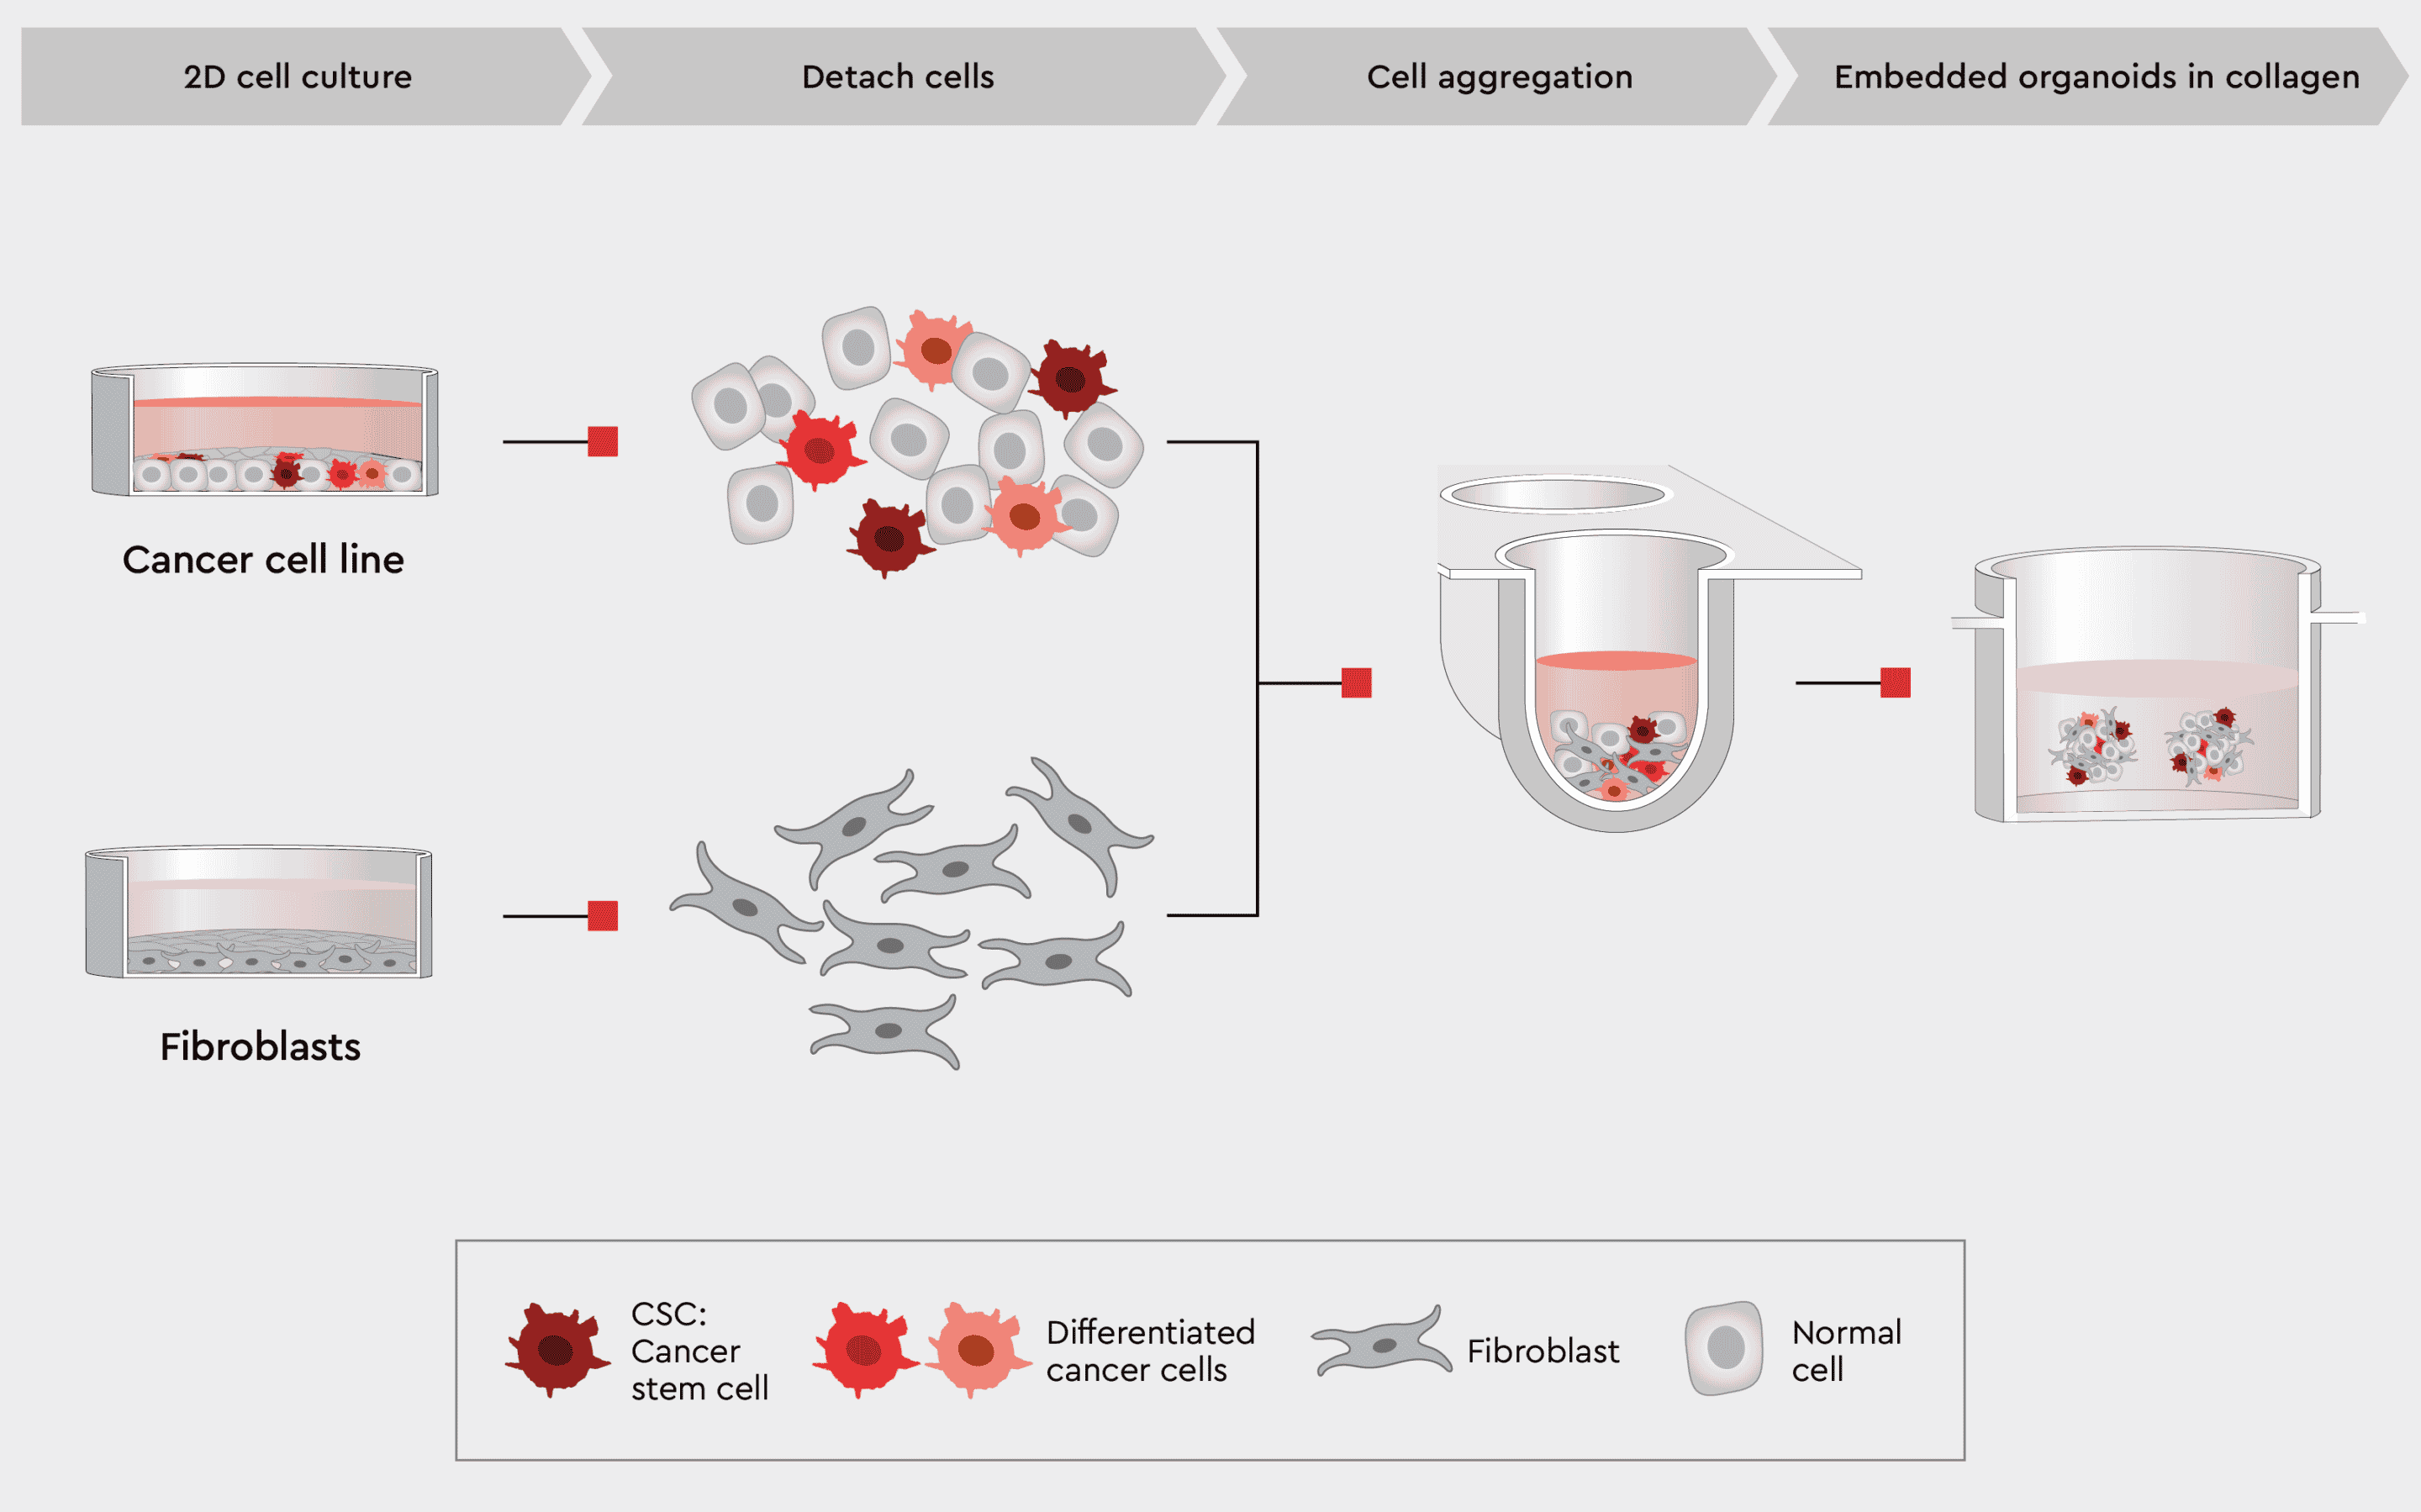 3D organoids with cancer and non-cancer cell types